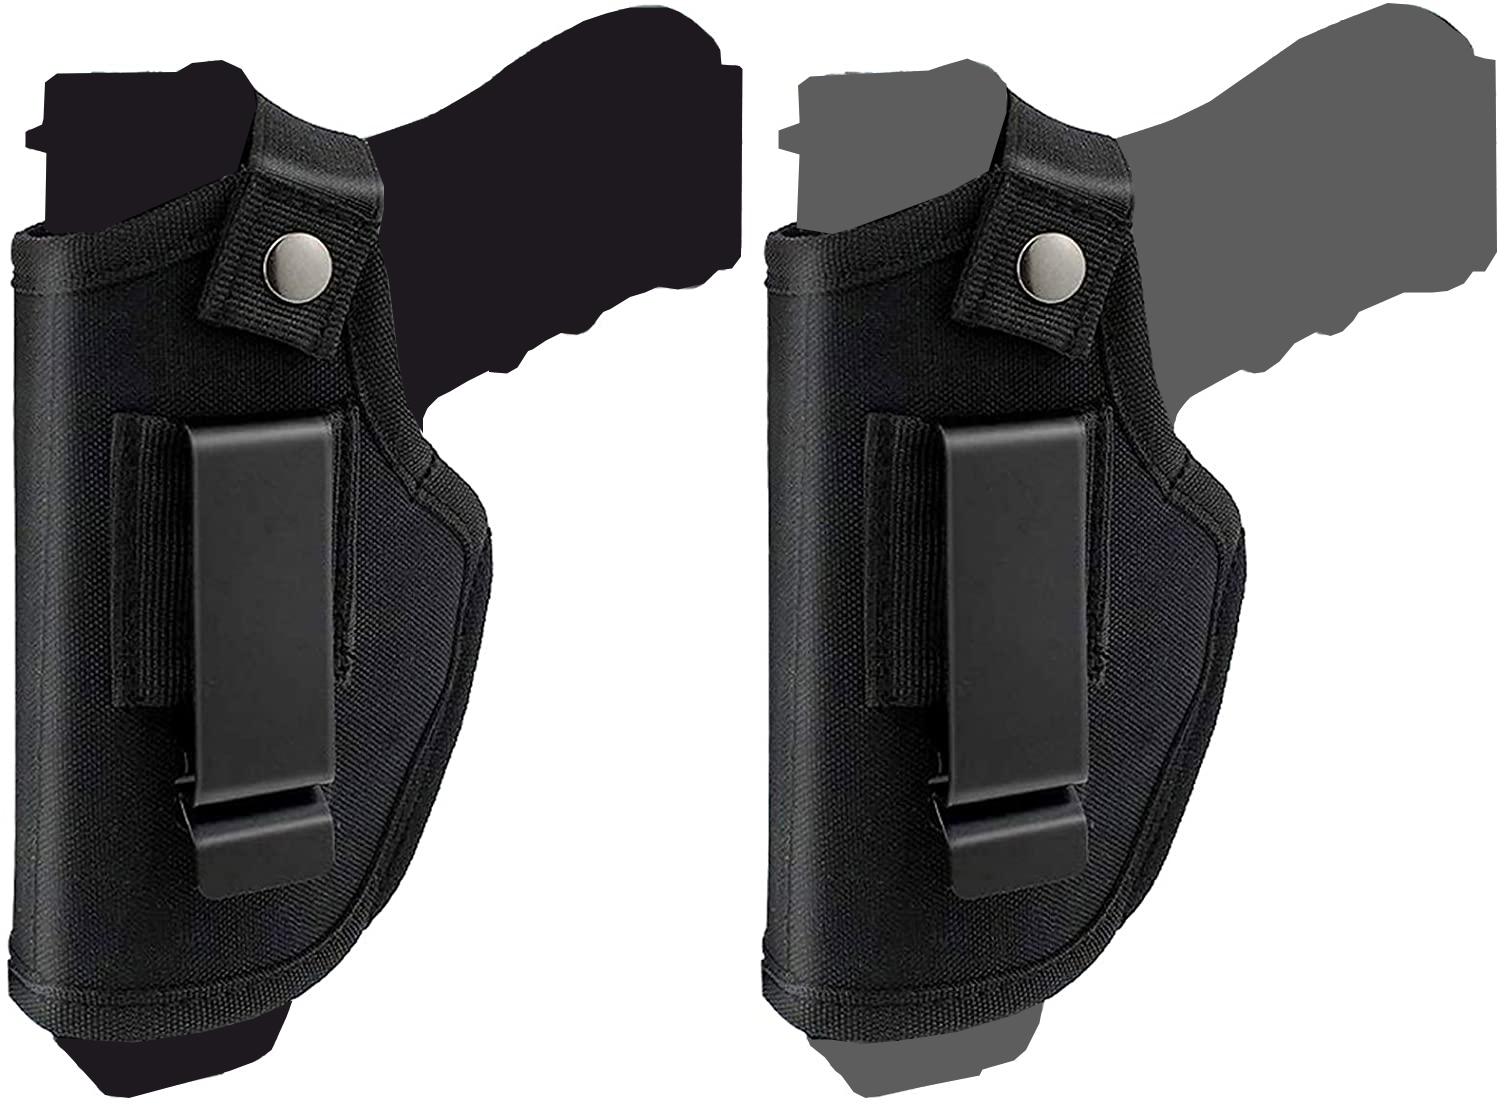 Compatible Concealed Carry Ultimate Belly Band Gun Holster